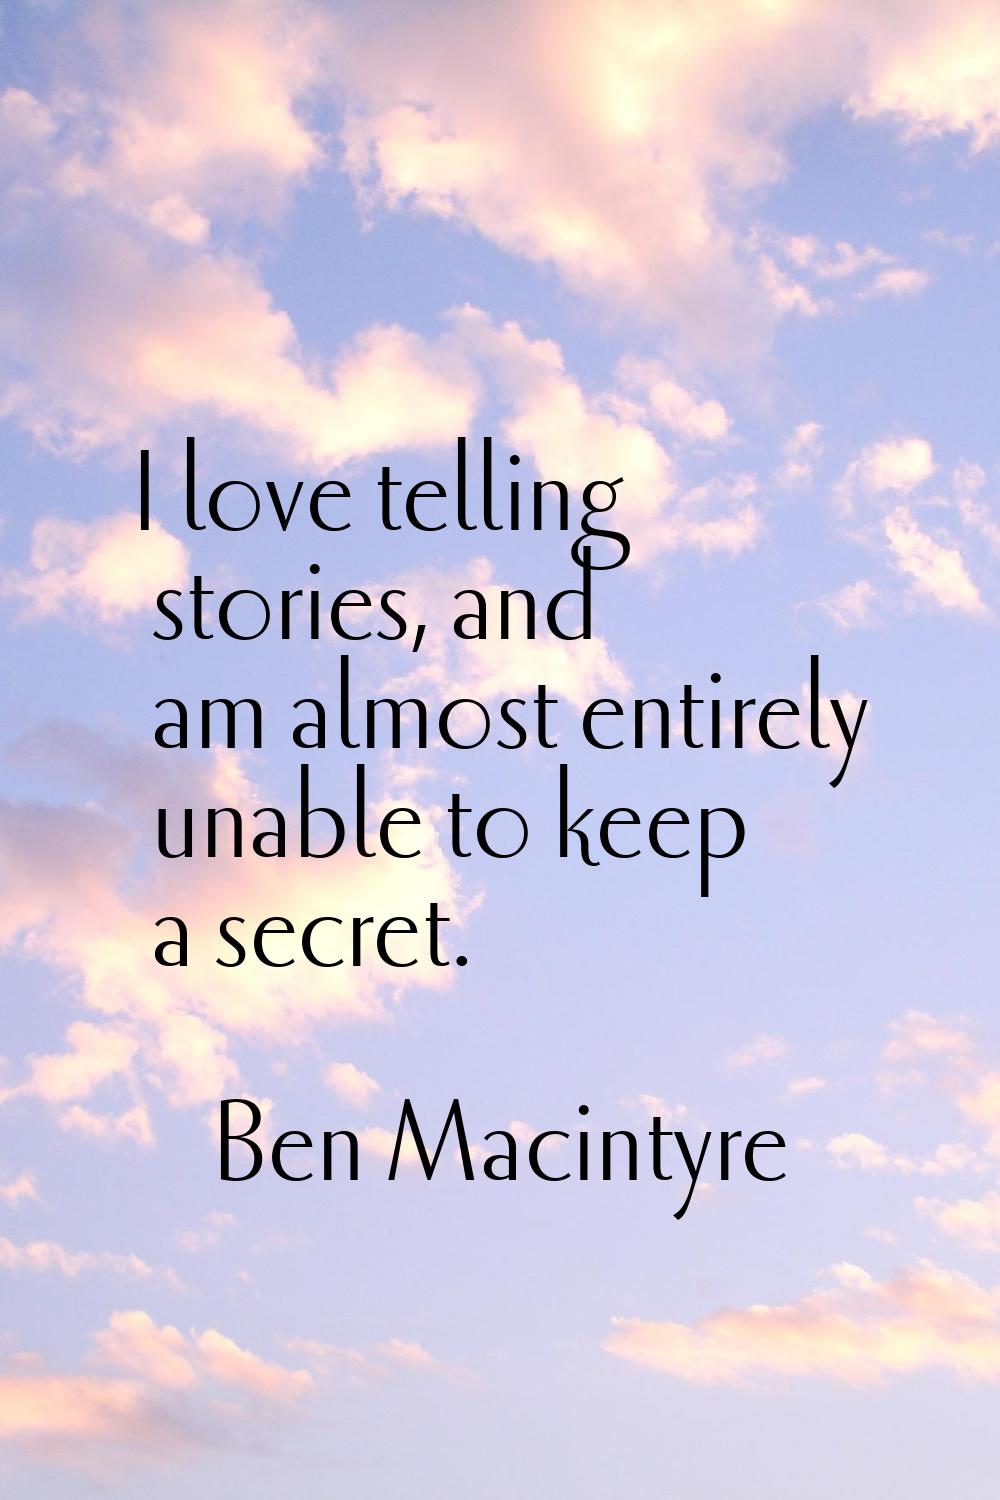 I love telling stories, and am almost entirely unable to keep a secret.